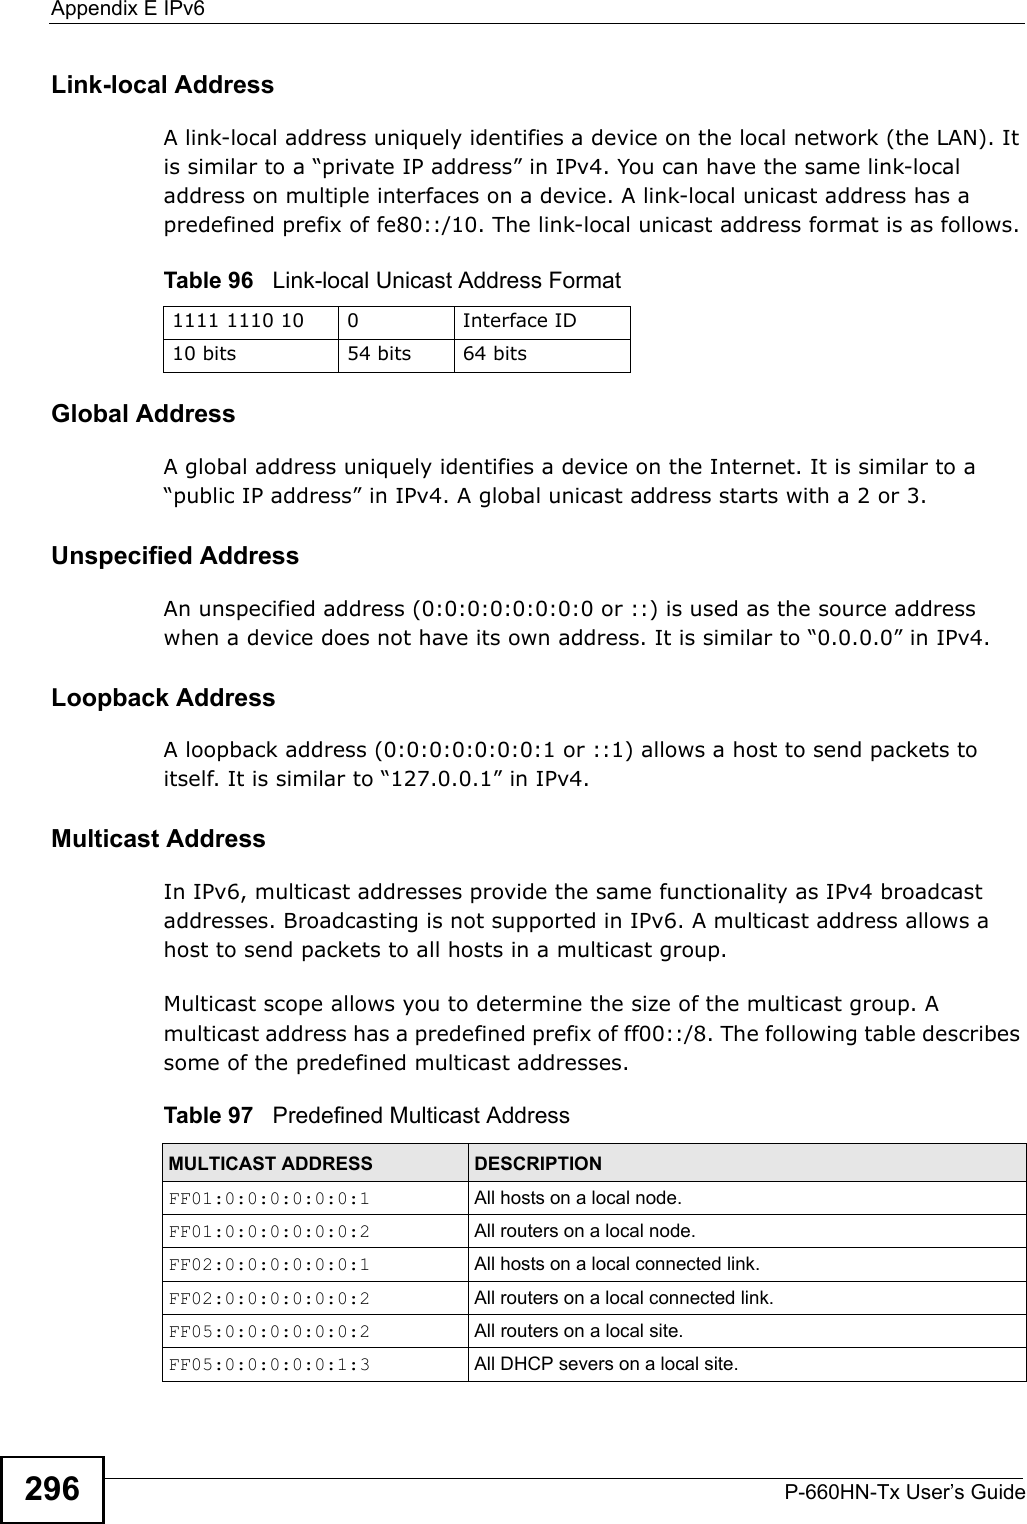 Appendix E IPv6P-660HN-Tx User’s Guide296Link-local AddressA link-local address uniquely identifies a device on the local network (the LAN). It is similar to a “private IP address” in IPv4. You can have the same link-local address on multiple interfaces on a device. A link-local unicast address has a predefined prefix of fe80::/10. The link-local unicast address format is as follows.Table 96   Link-local Unicast Address FormatGlobal AddressA global address uniquely identifies a device on the Internet. It is similar to a “public IP address” in IPv4. A global unicast address starts with a 2 or 3. Unspecified AddressAn unspecified address (0:0:0:0:0:0:0:0 or ::) is used as the source address when a device does not have its own address. It is similar to “0.0.0.0” in IPv4.Loopback AddressA loopback address (0:0:0:0:0:0:0:1 or ::1) allows a host to send packets to itself. It is similar to “127.0.0.1” in IPv4.Multicast AddressIn IPv6, multicast addresses provide the same functionality as IPv4 broadcast addresses. Broadcasting is not supported in IPv6. A multicast address allows a host to send packets to all hosts in a multicast group. Multicast scope allows you to determine the size of the multicast group. A multicast address has a predefined prefix of ff00::/8. The following table describes some of the predefined multicast addresses. 1111 1110 10 0 Interface ID10 bits 54 bits 64 bitsTable 97   Predefined Multicast AddressMULTICAST ADDRESS DESCRIPTIONFF01:0:0:0:0:0:0:1 All hosts on a local node. FF01:0:0:0:0:0:0:2 All routers on a local node.FF02:0:0:0:0:0:0:1 All hosts on a local connected link.FF02:0:0:0:0:0:0:2 All routers on a local connected link.FF05:0:0:0:0:0:0:2 All routers on a local site. FF05:0:0:0:0:0:1:3 All DHCP severs on a local site. 